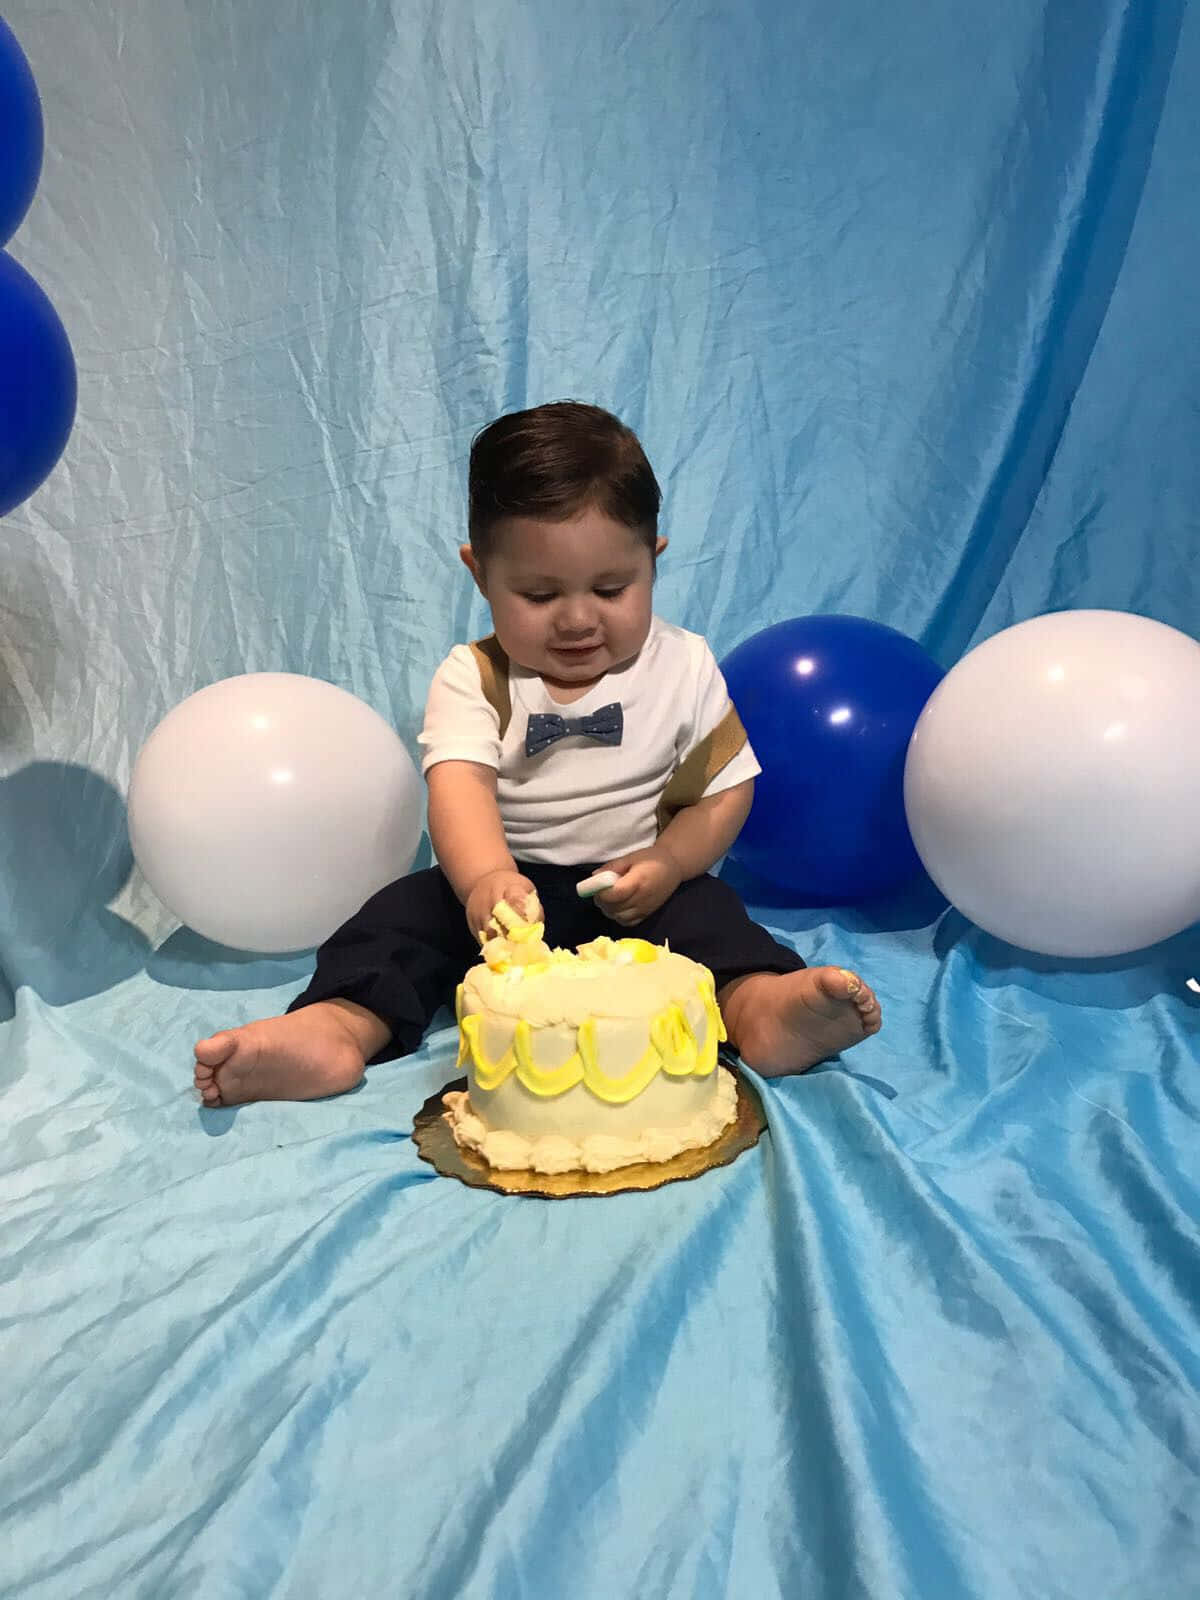 A Baby Boy Sitting In Front Of A Cake With Balloons